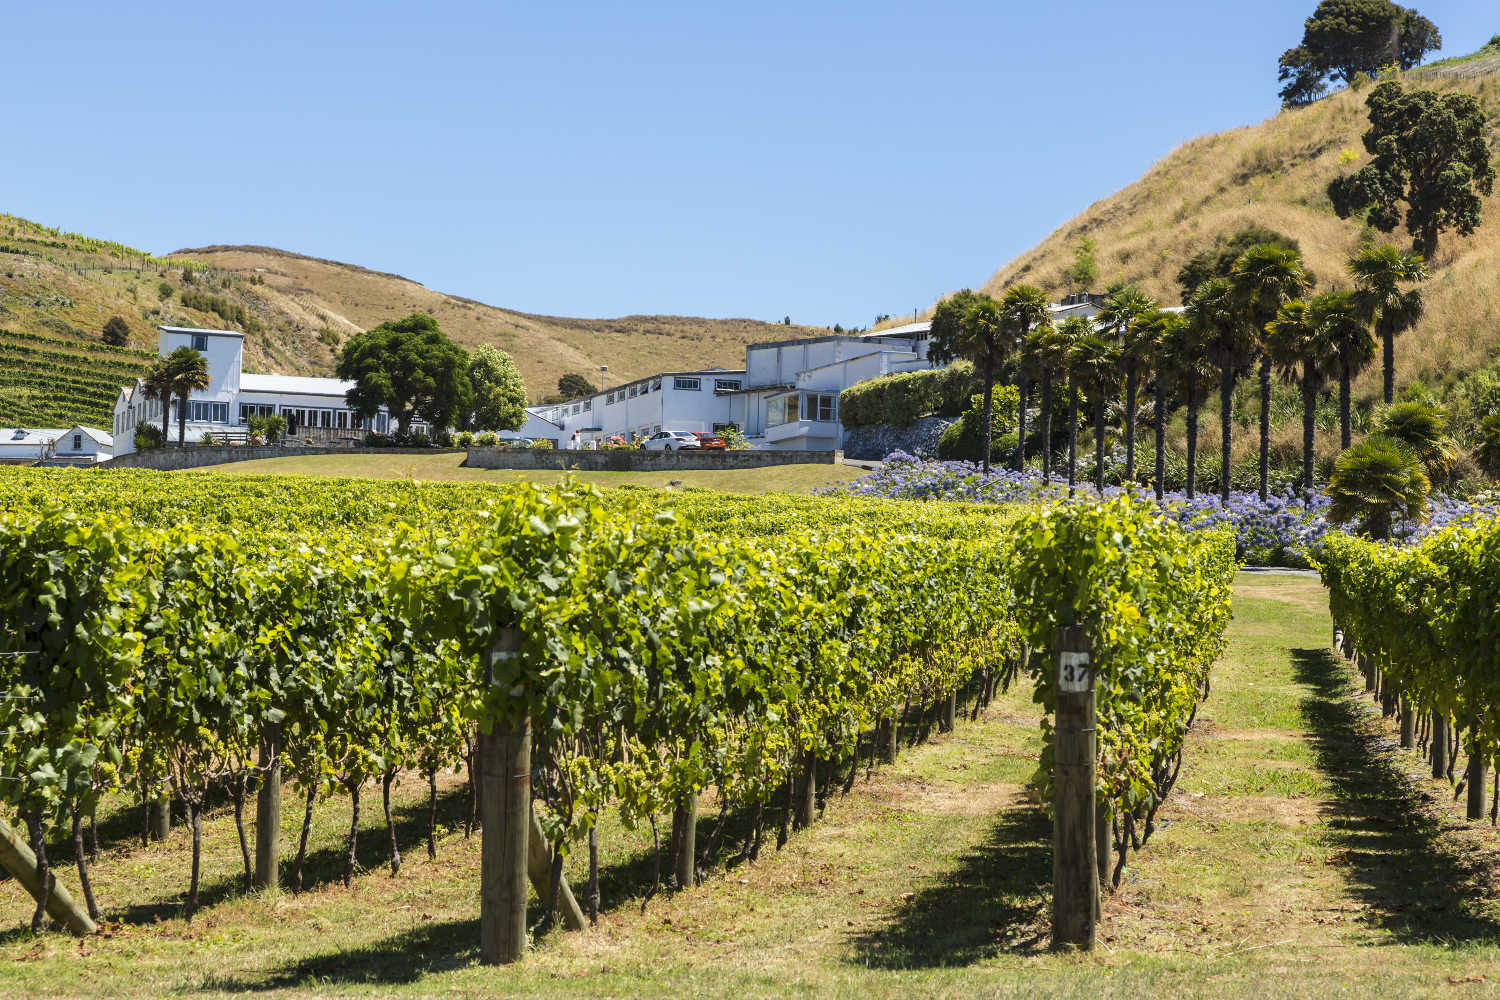 Esk Valley winery and vineyard